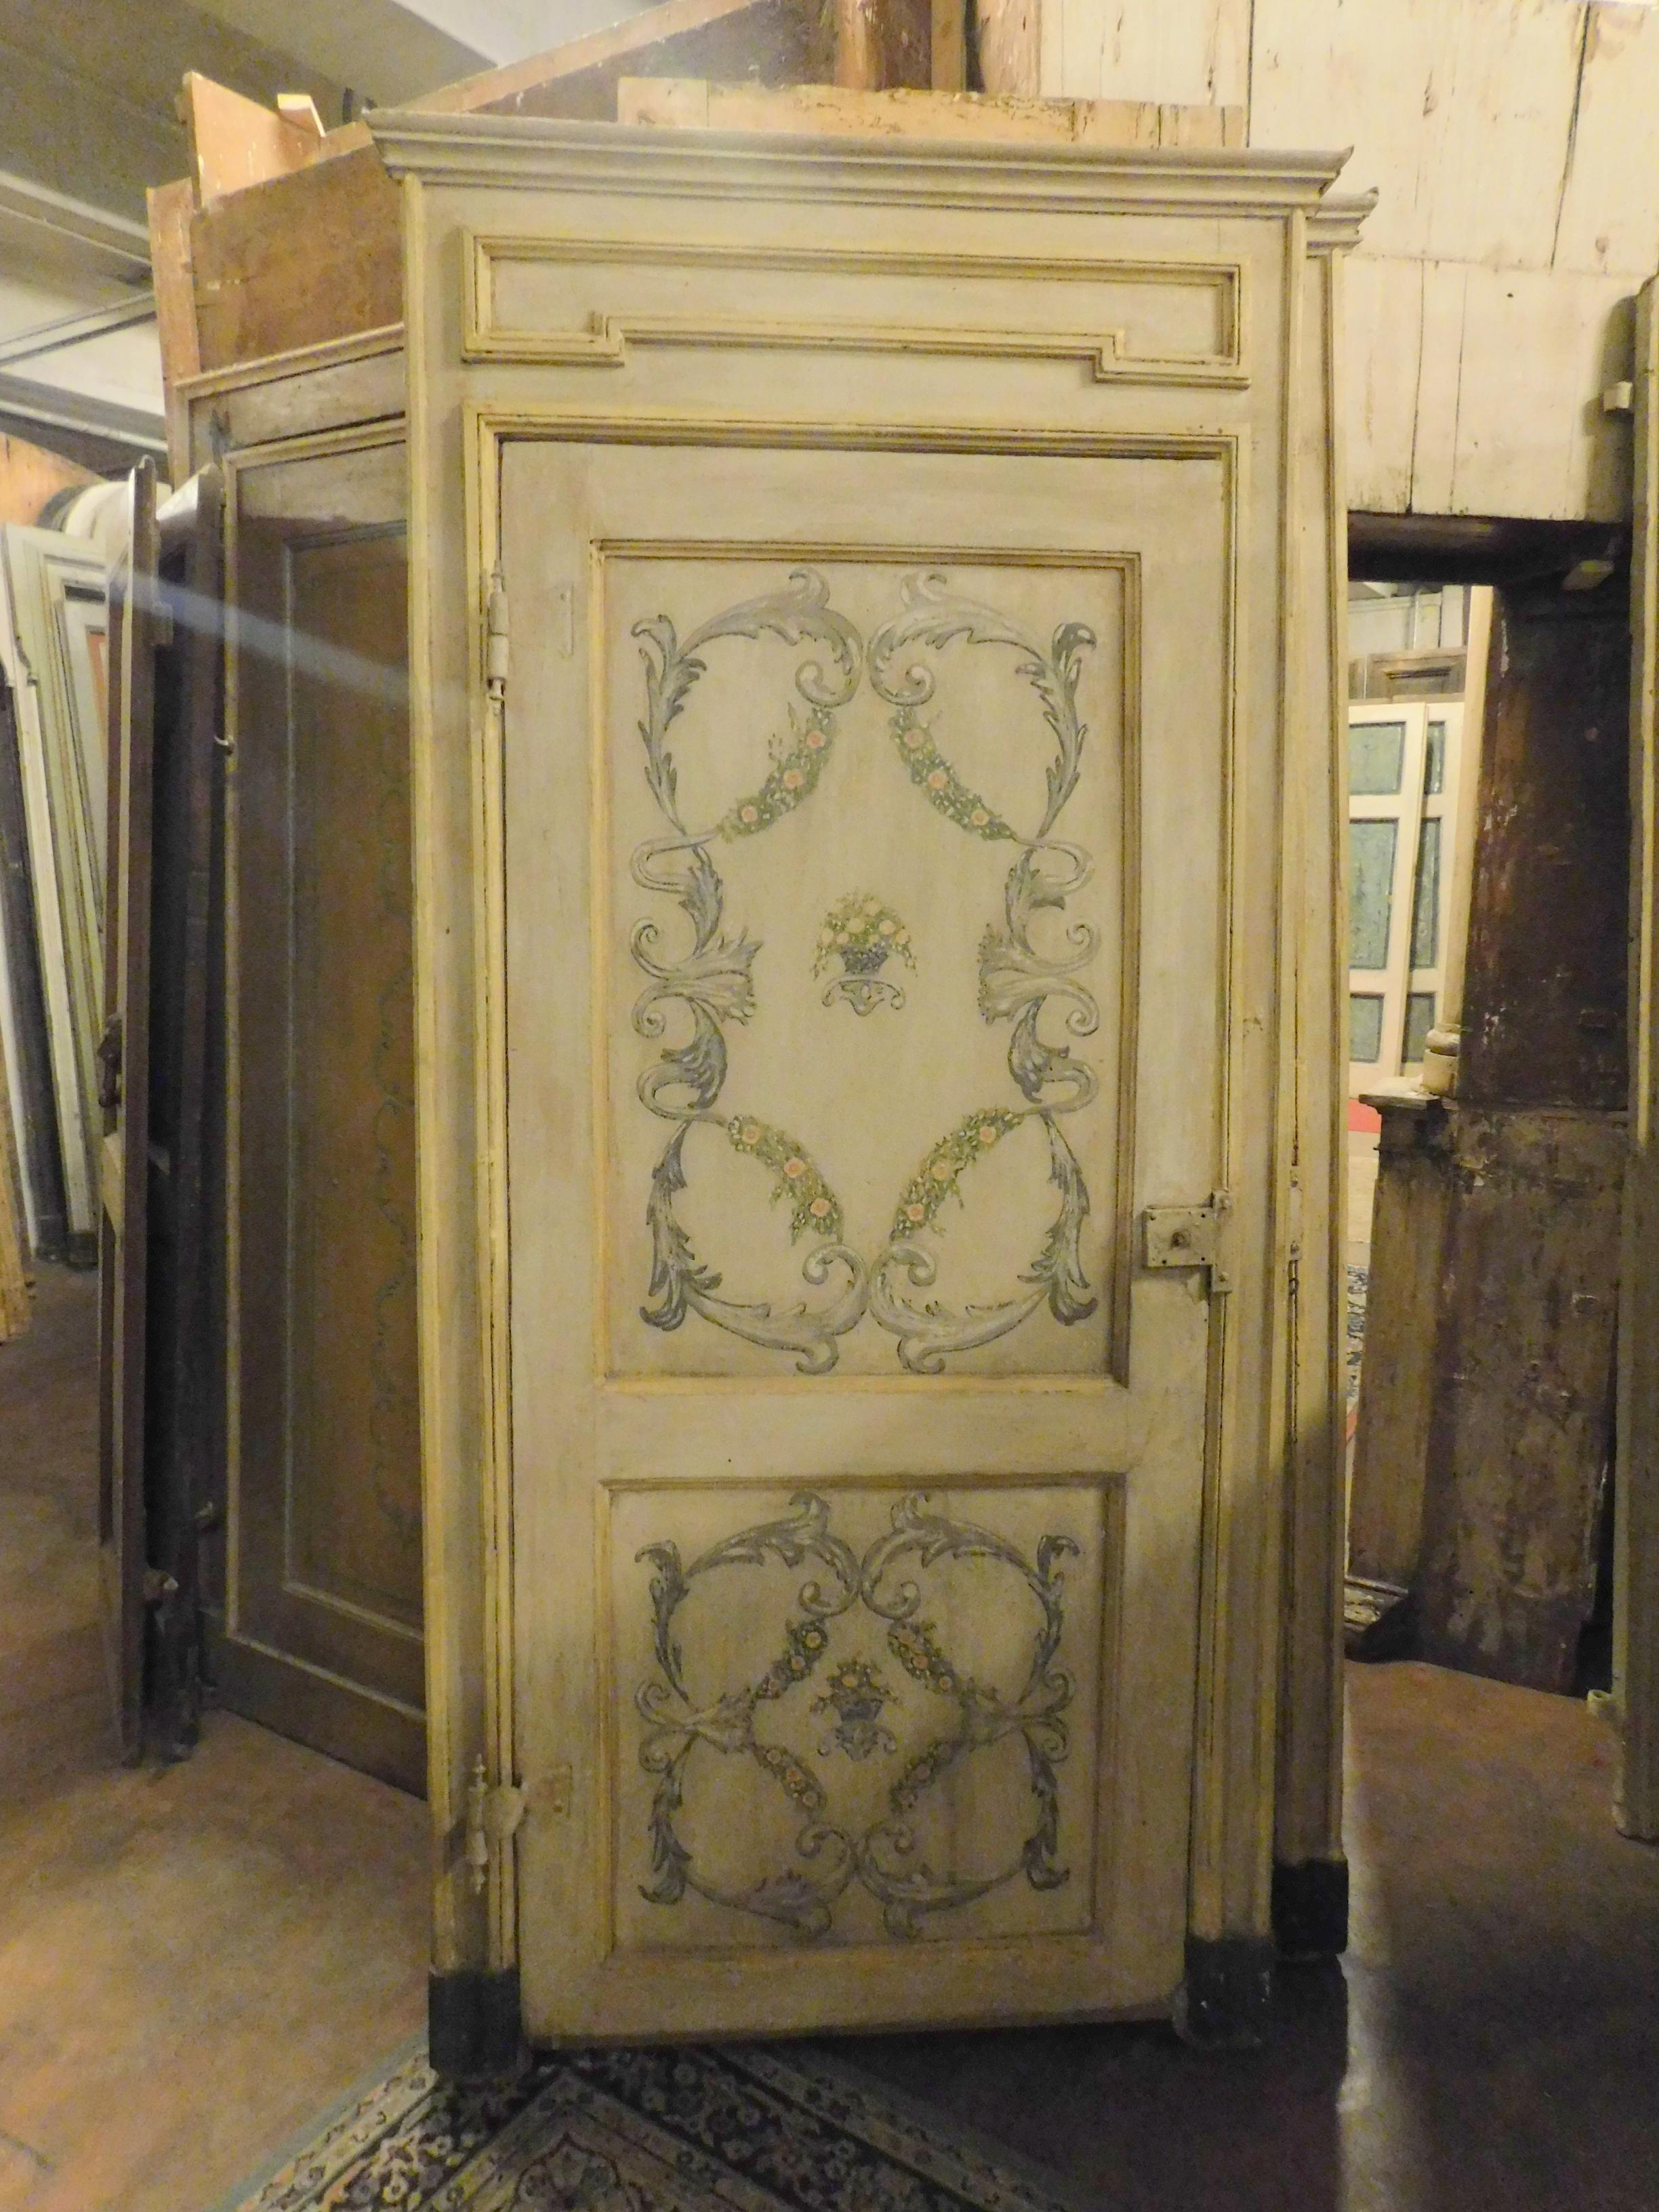 2 ancient doors, painted with gray designs on a beige backdrop with Baroque motifs, have original irons with goose neck, then it opens on the bias, it has a black skirting to change its height.
Door also beautiful on the back, beautiful and